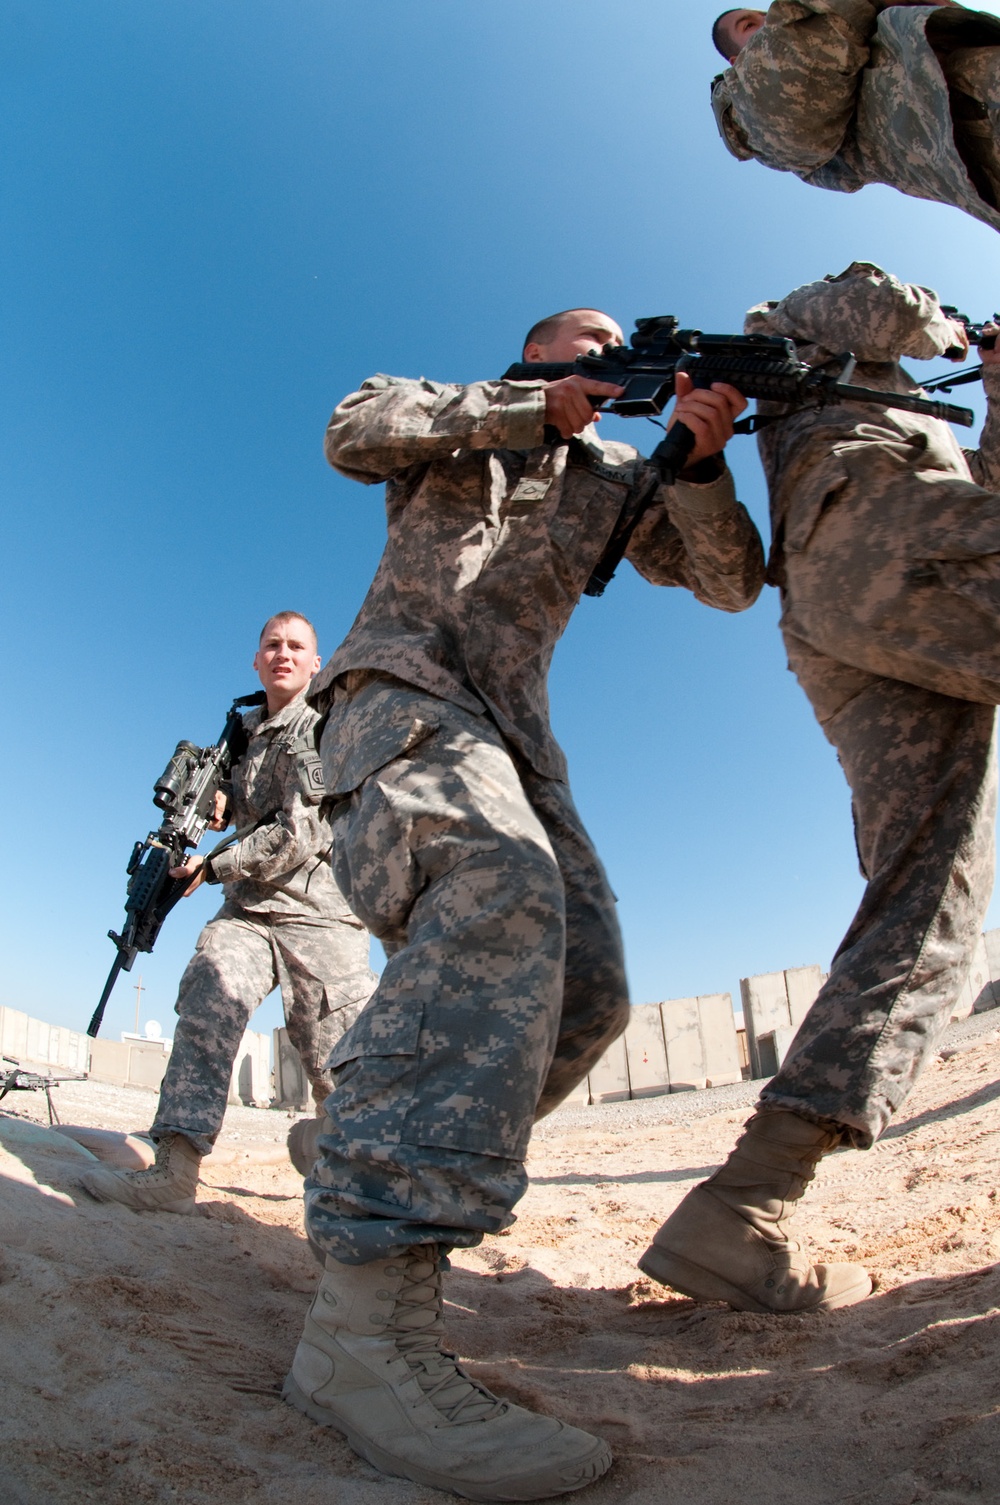 AAB Paratroopers Maintain Combat Skills While Deployed